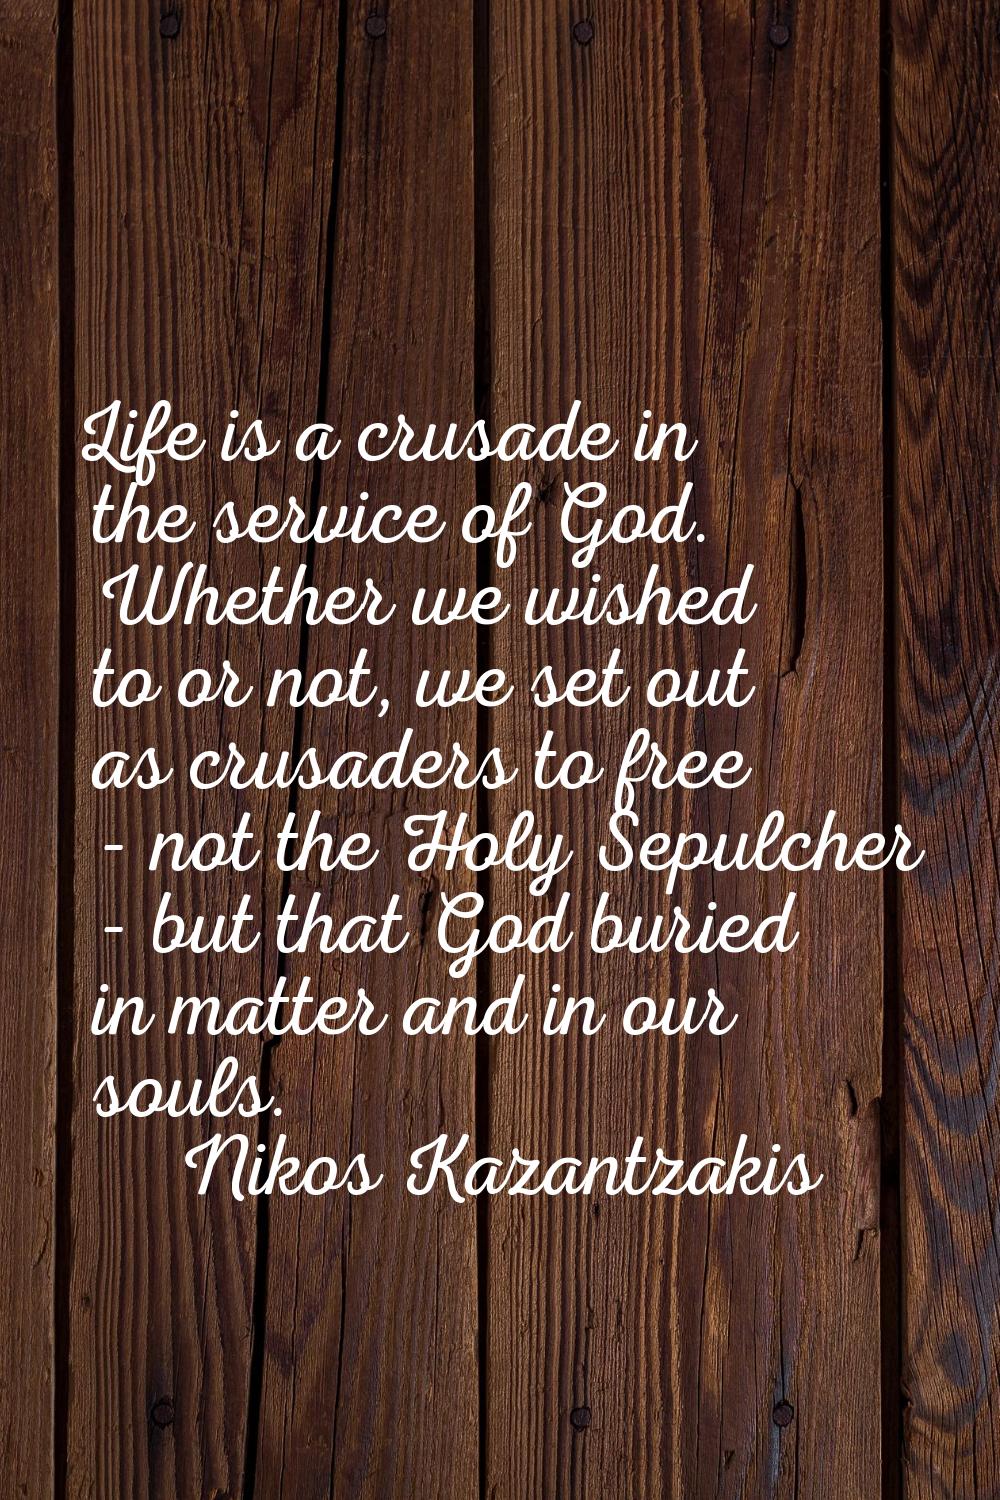 Life is a crusade in the service of God. Whether we wished to or not, we set out as crusaders to fr